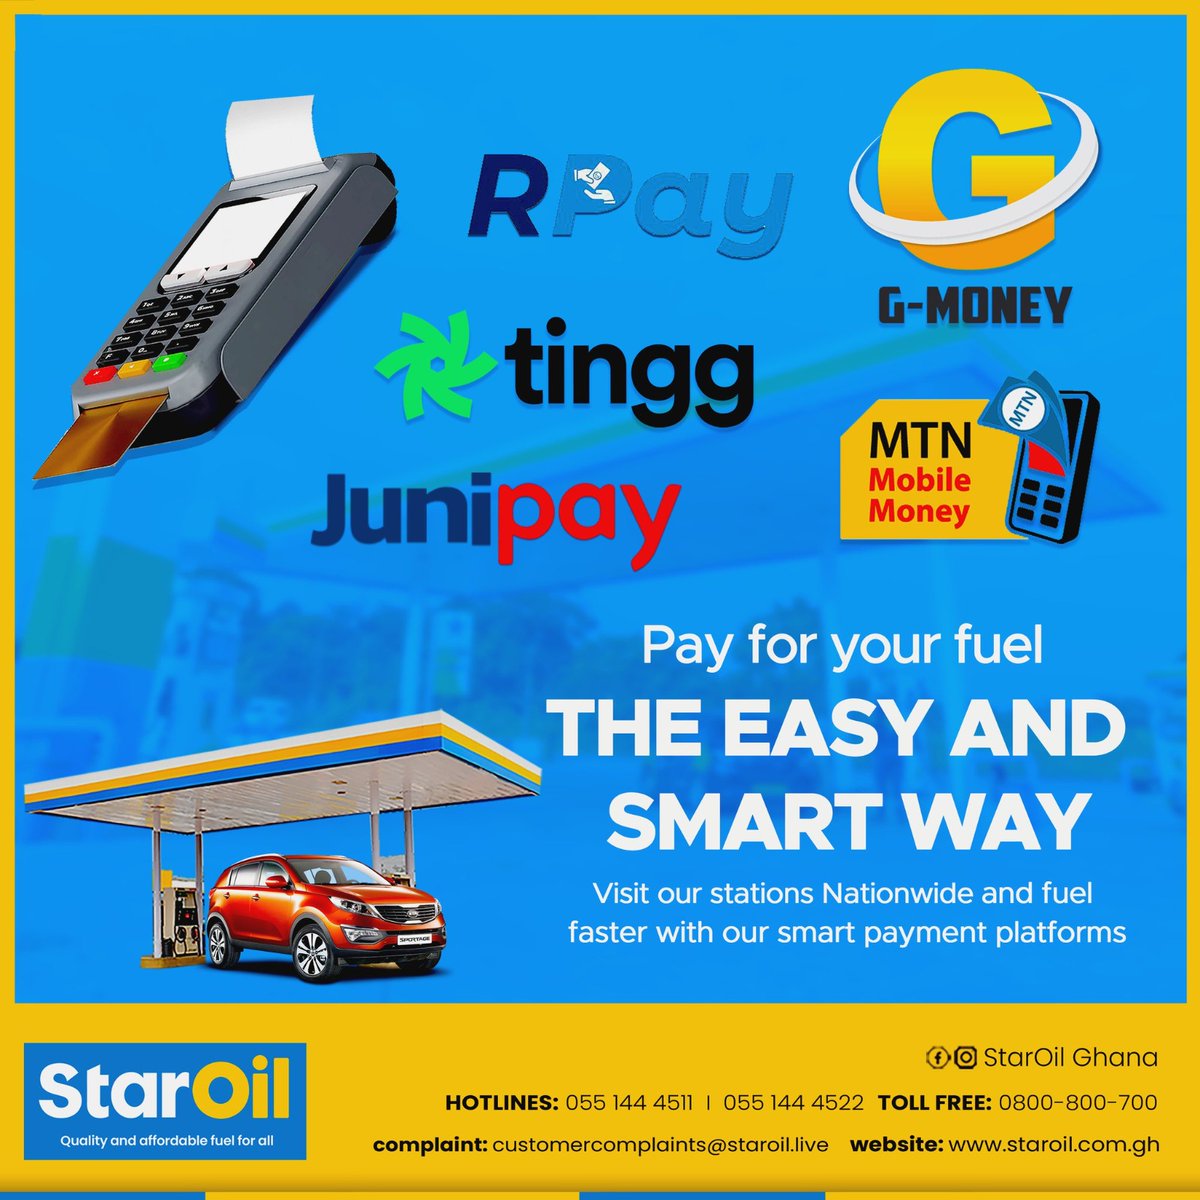 Enrich your experience with a diversity of E-payment options anytime you visit any of our outlets nationwide. 

Drive by and let’s fuel your ride the easy and smart way.

#EveryDropCounts
#QualityYouCanAfford
#StarOilGhana
#IamAStarSaver